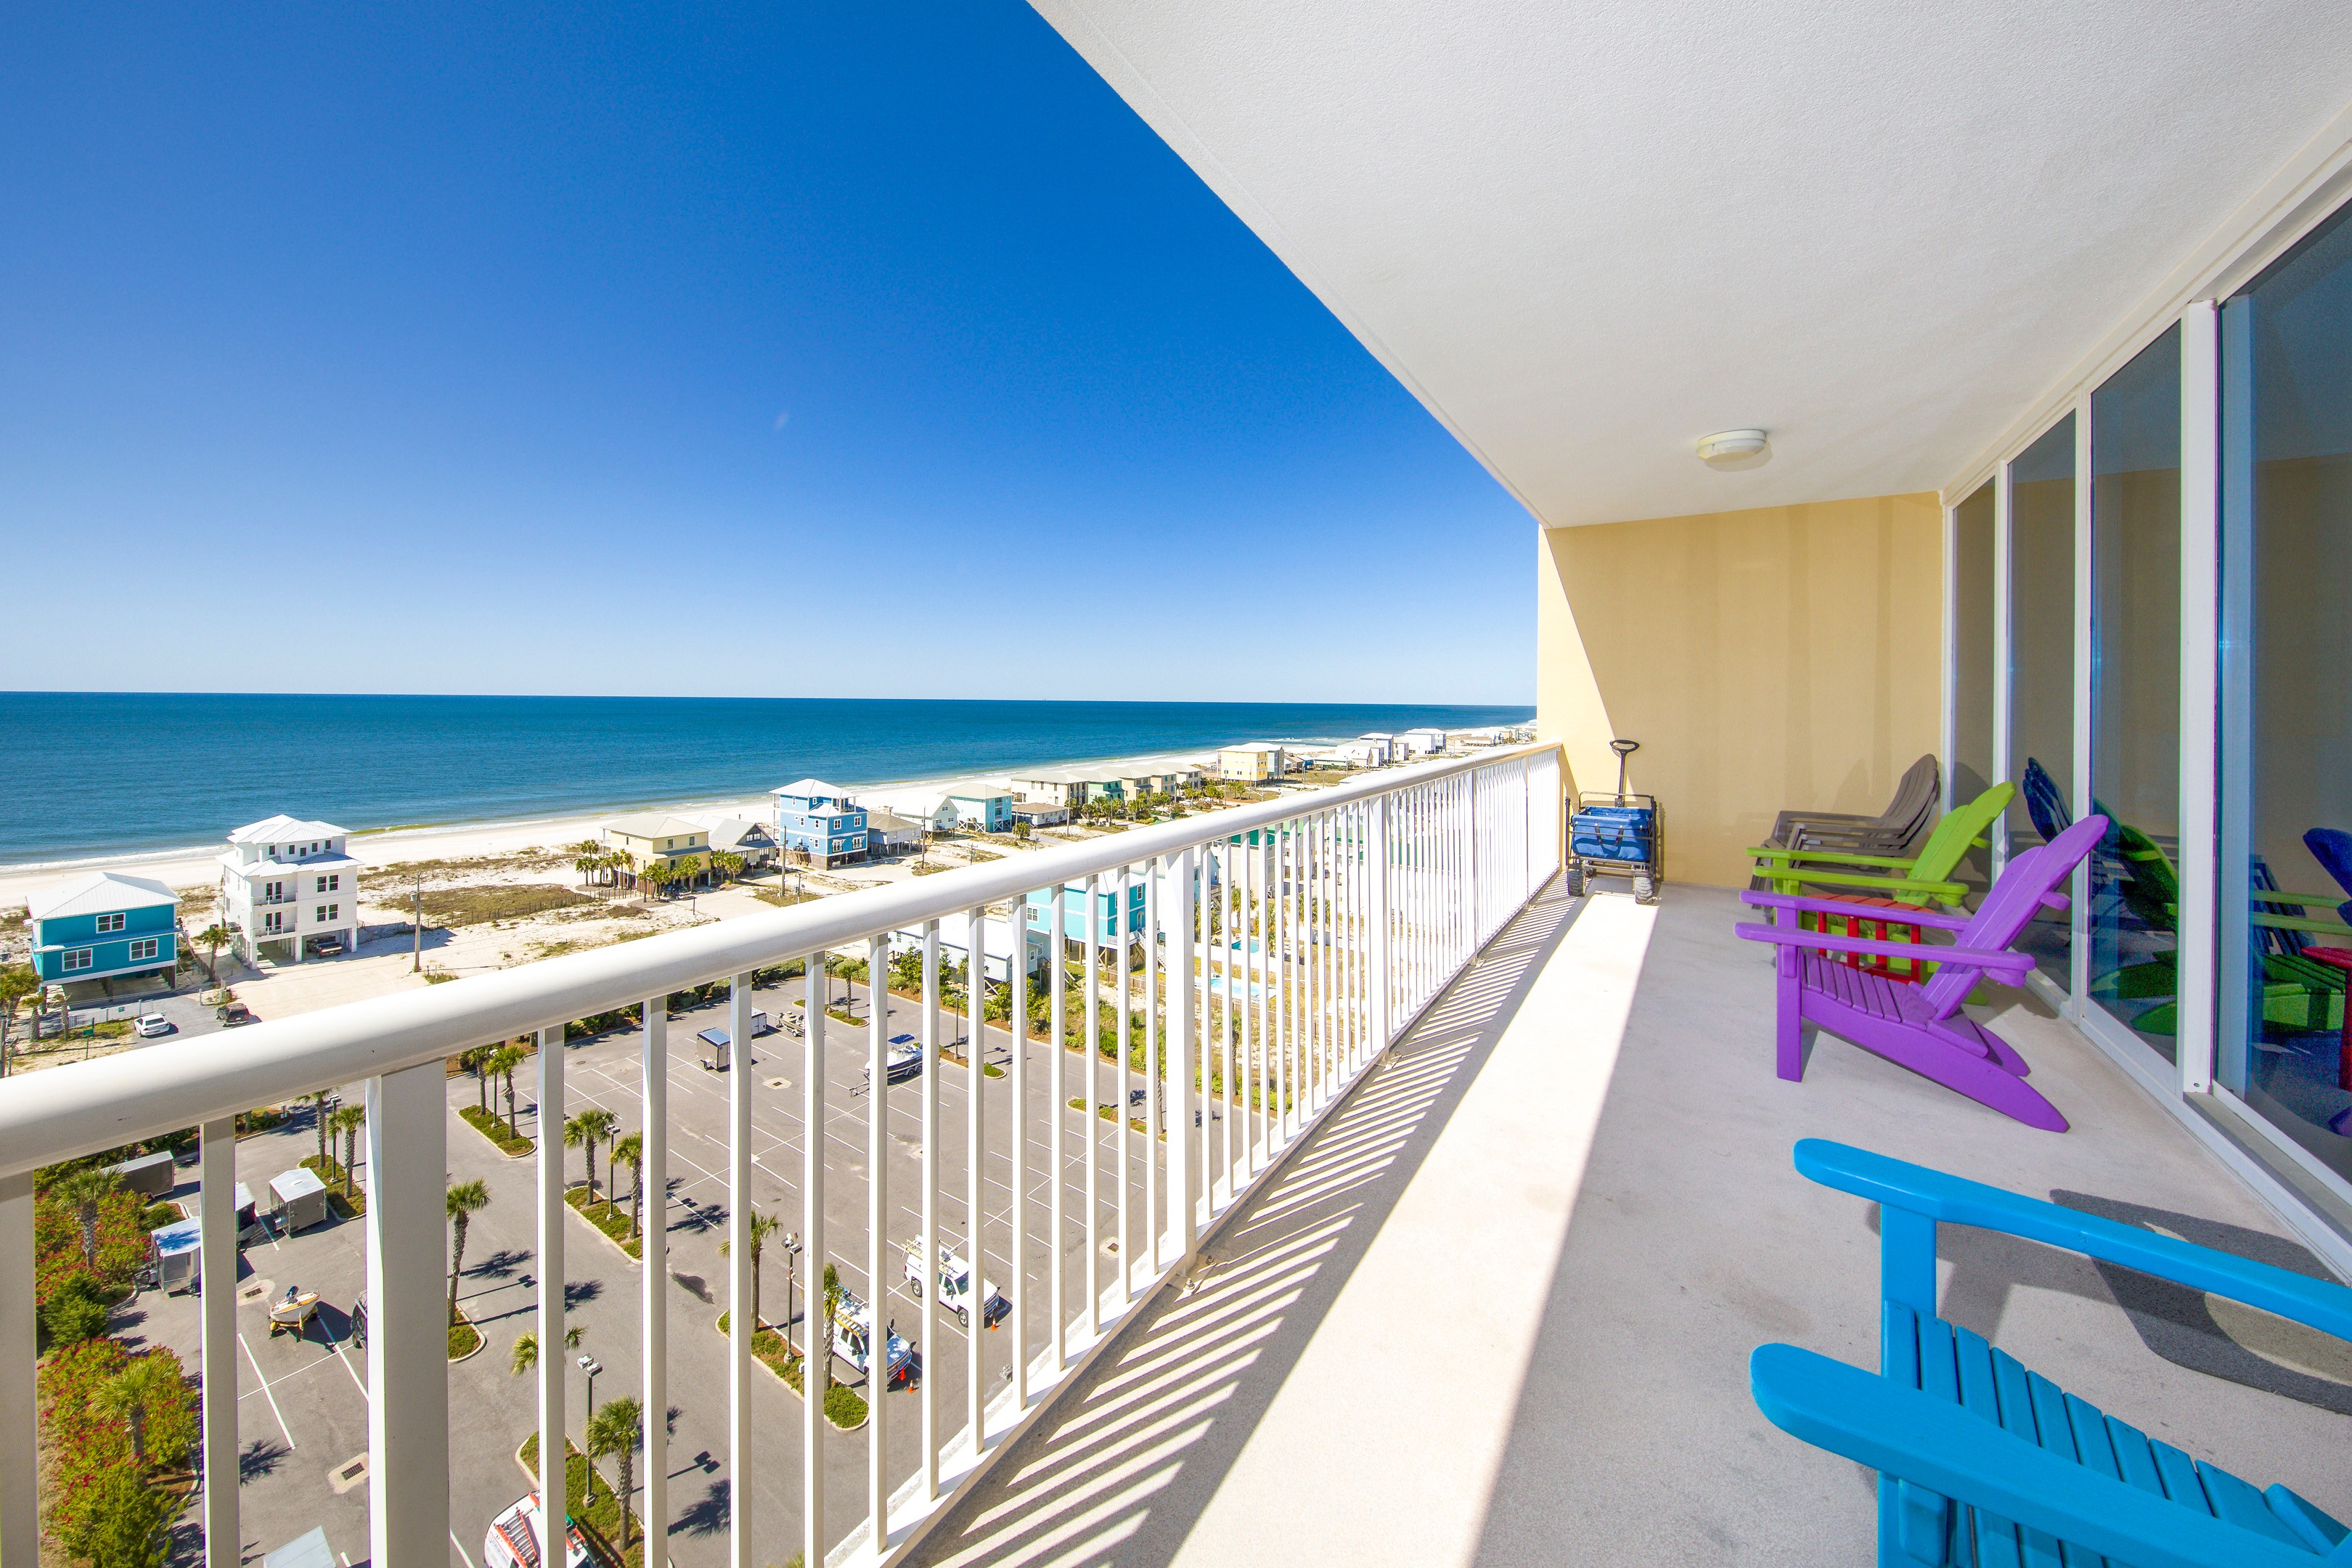 Enjoy the view of the Gulf and beach from the private balcony.